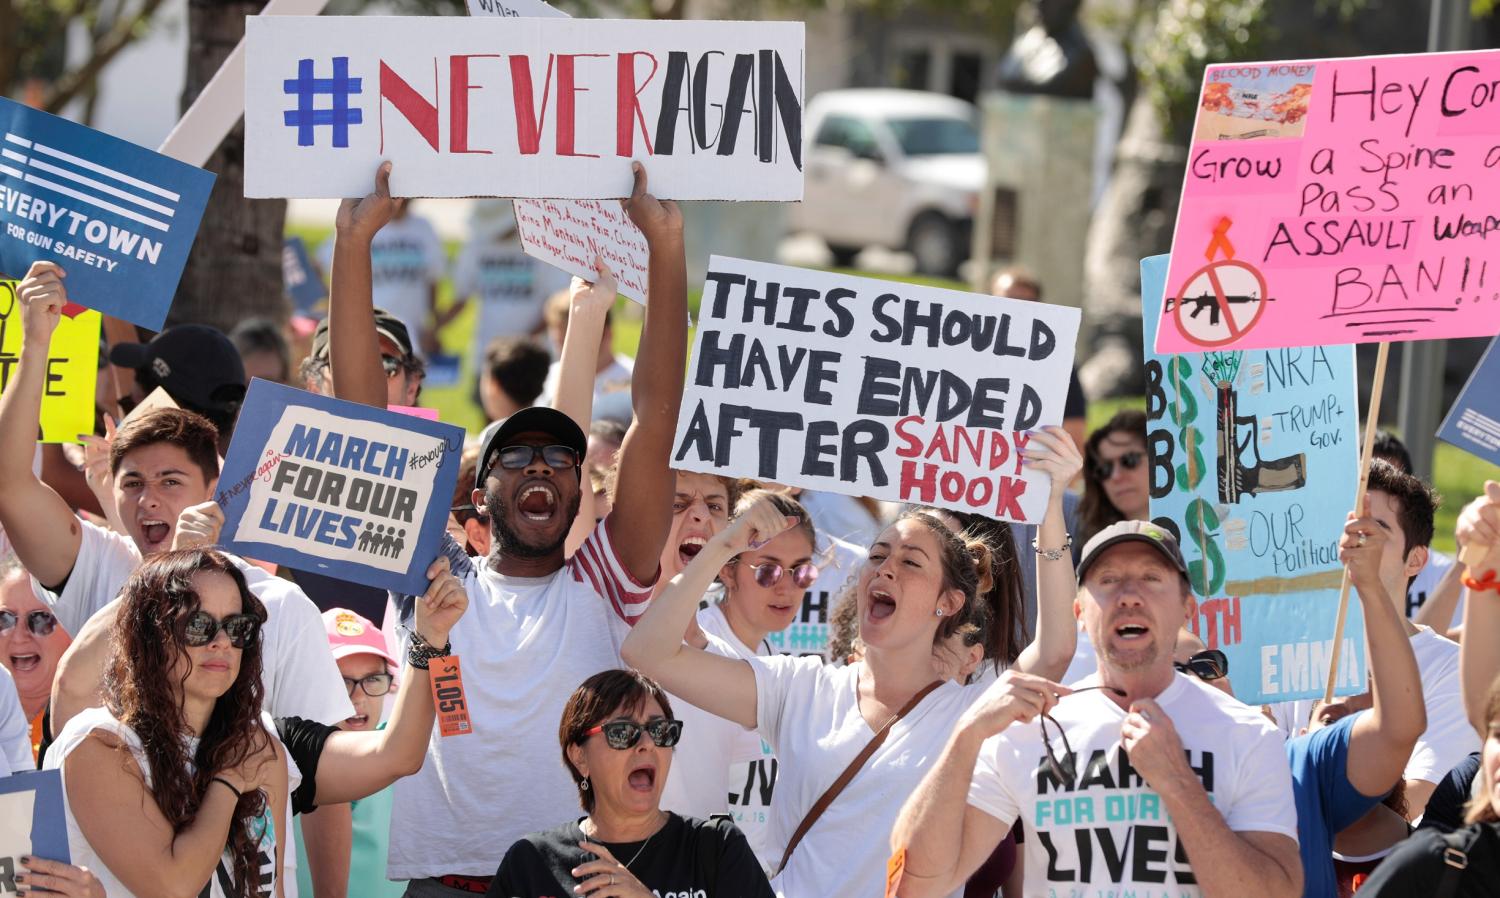 Students hold signs while rallying in the street during the "March for Our Lives" demanding stricter gun control laws at the Miami Beach Senior High School, in Miami, Florida, U.S., March 24, 2018. REUTERS/Javier Galeano - RC1C60279010